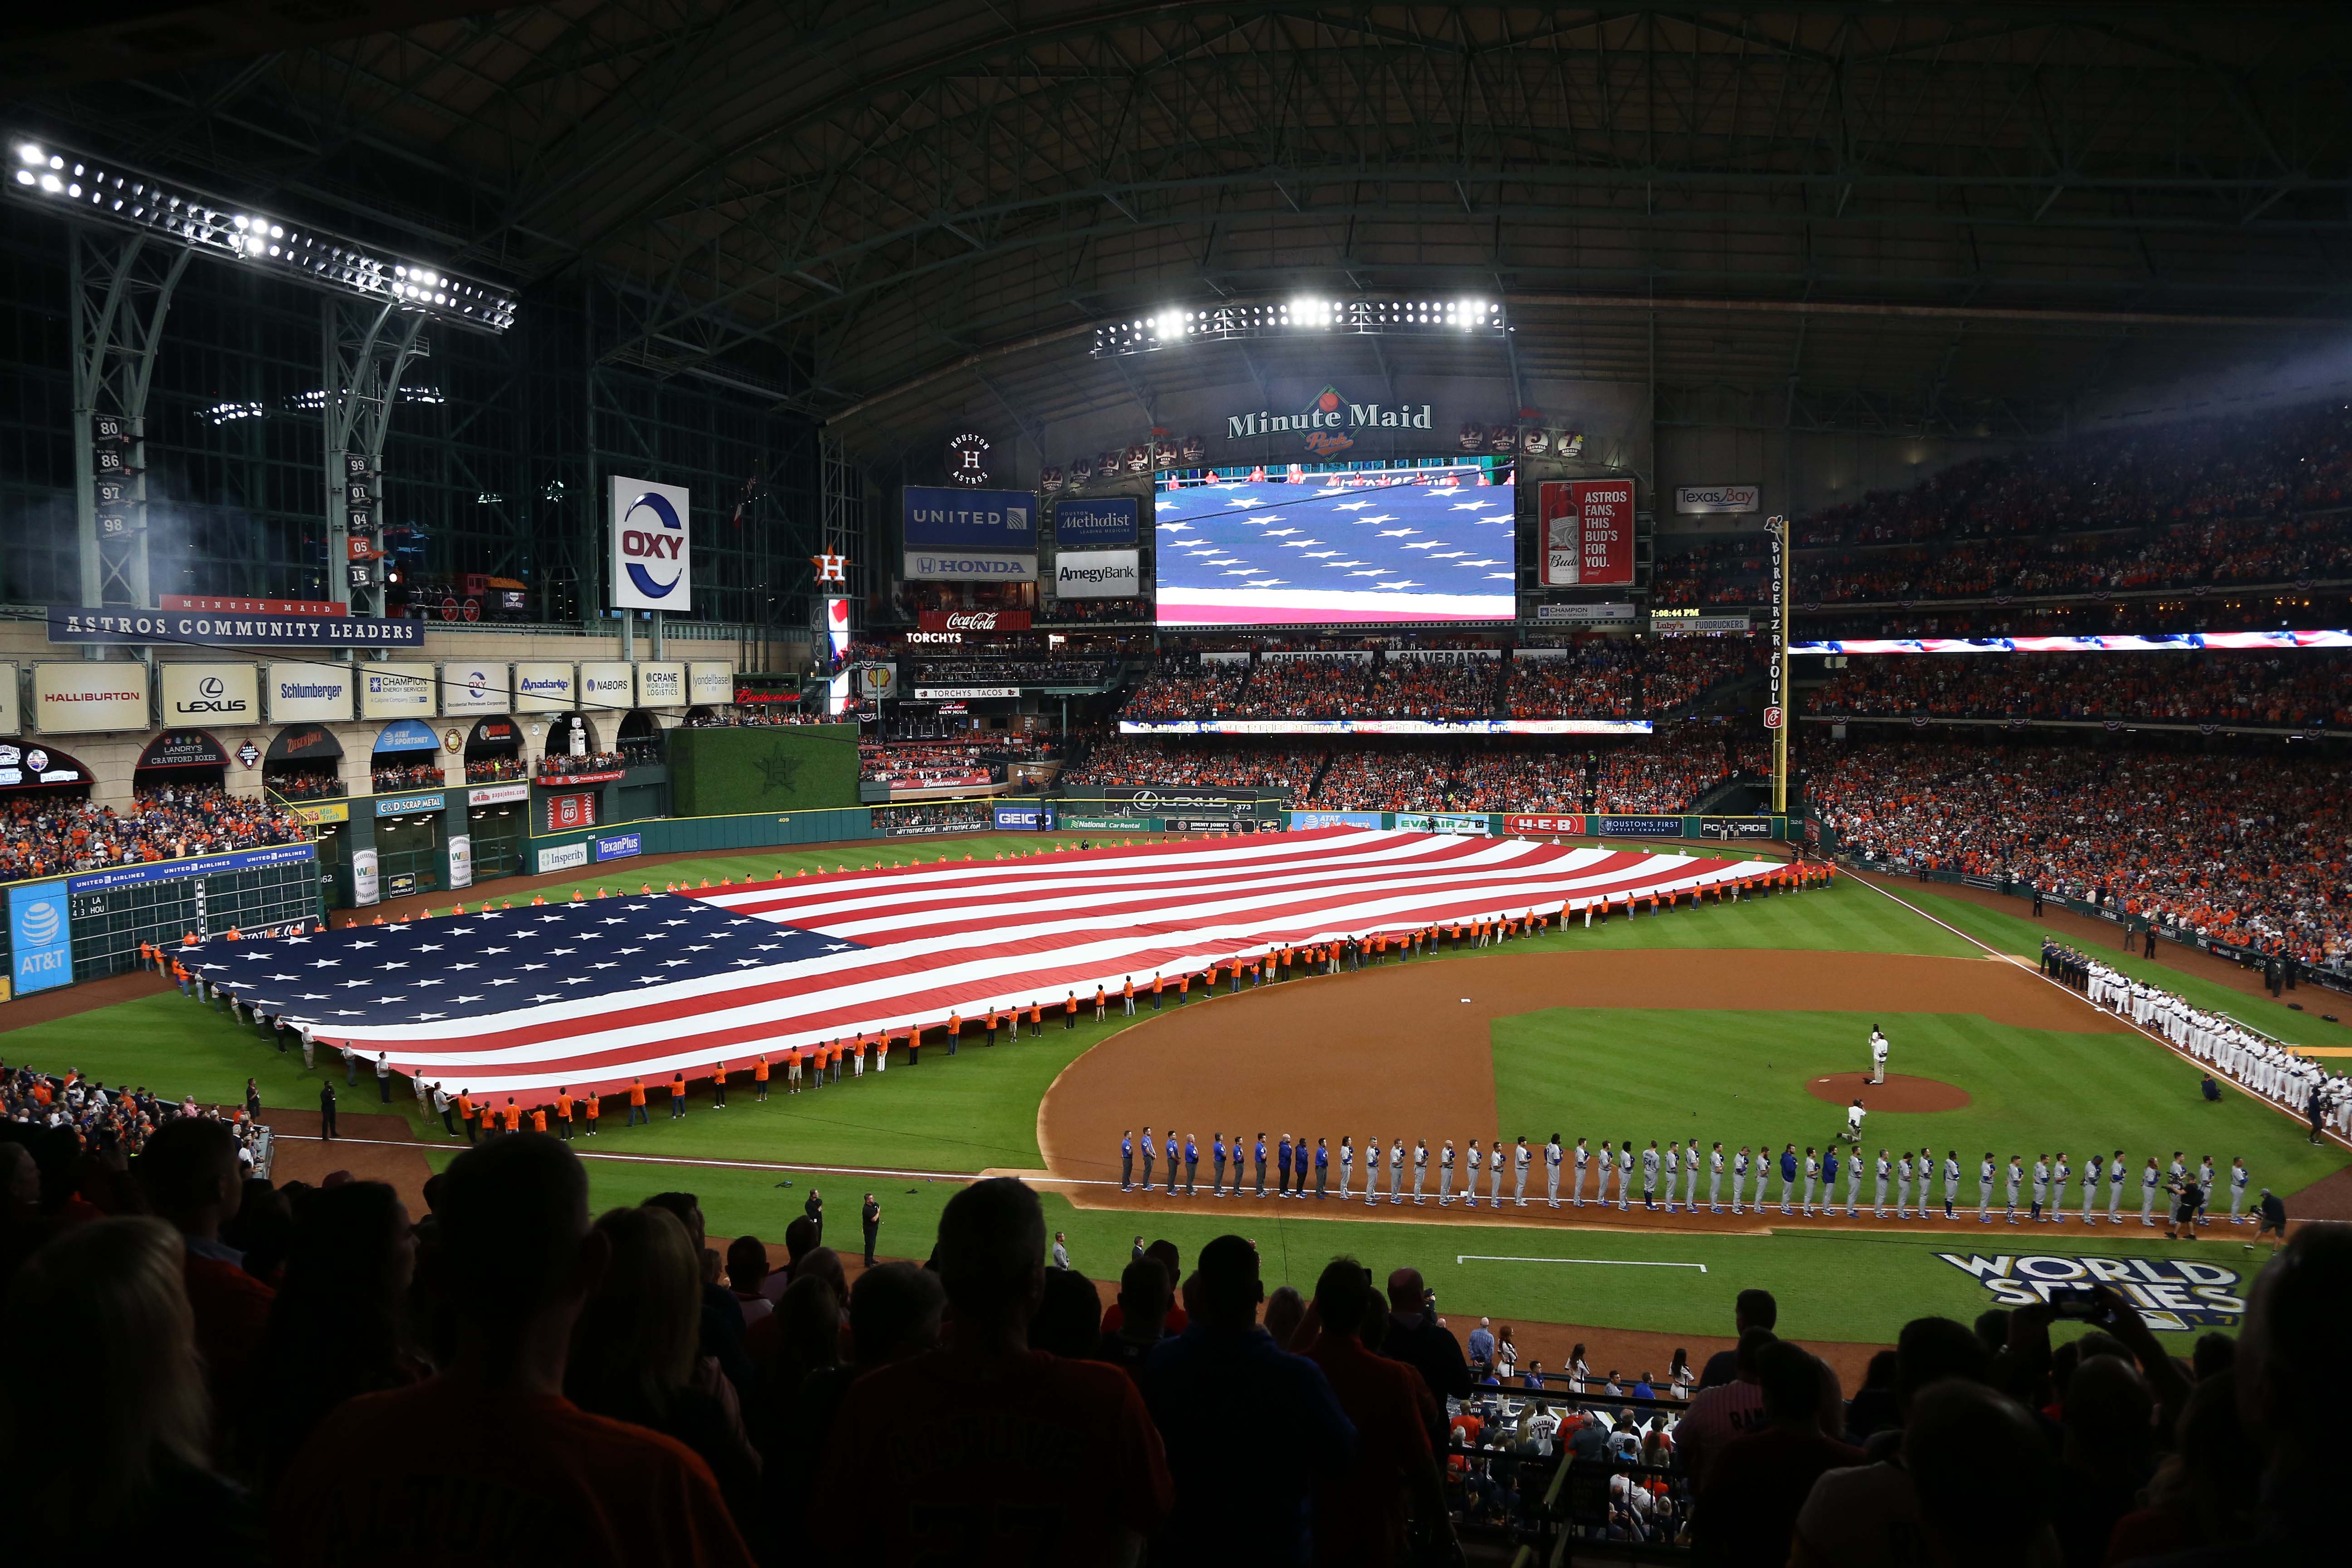 World Series: Raucous crowd at Minute Maid Park giving Astros edge